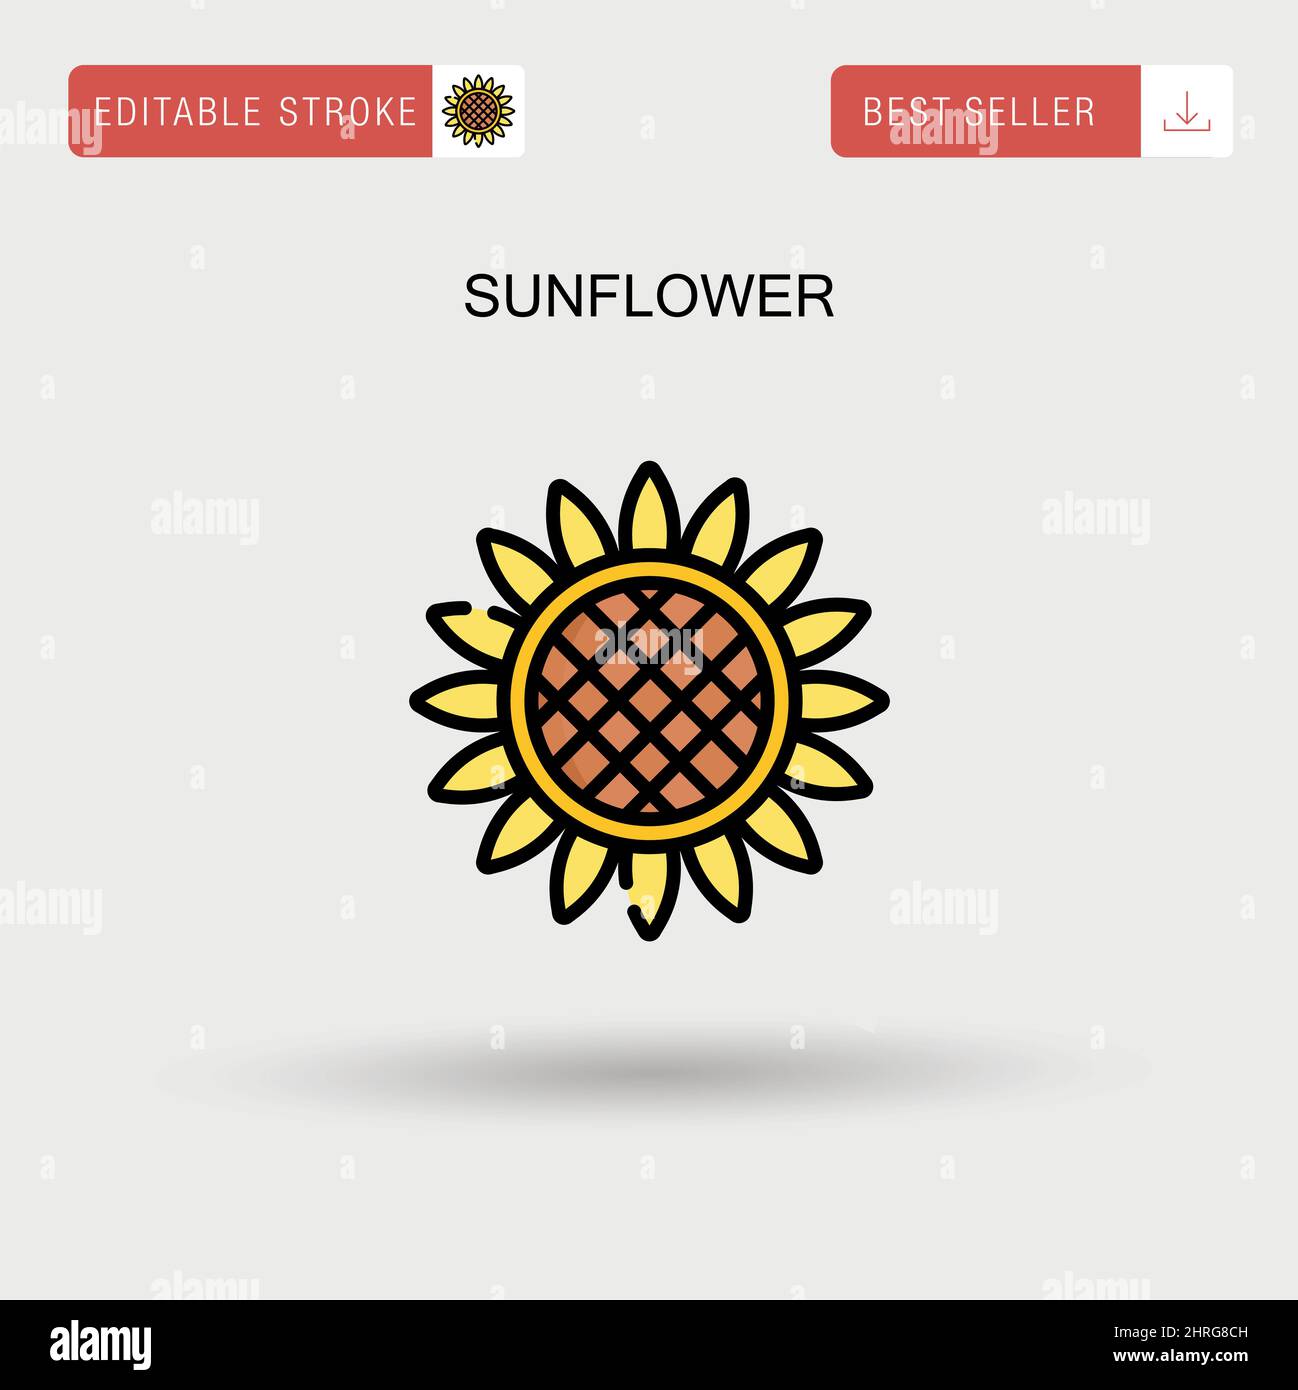 Sunflower Simple vector icon. Stock Vector